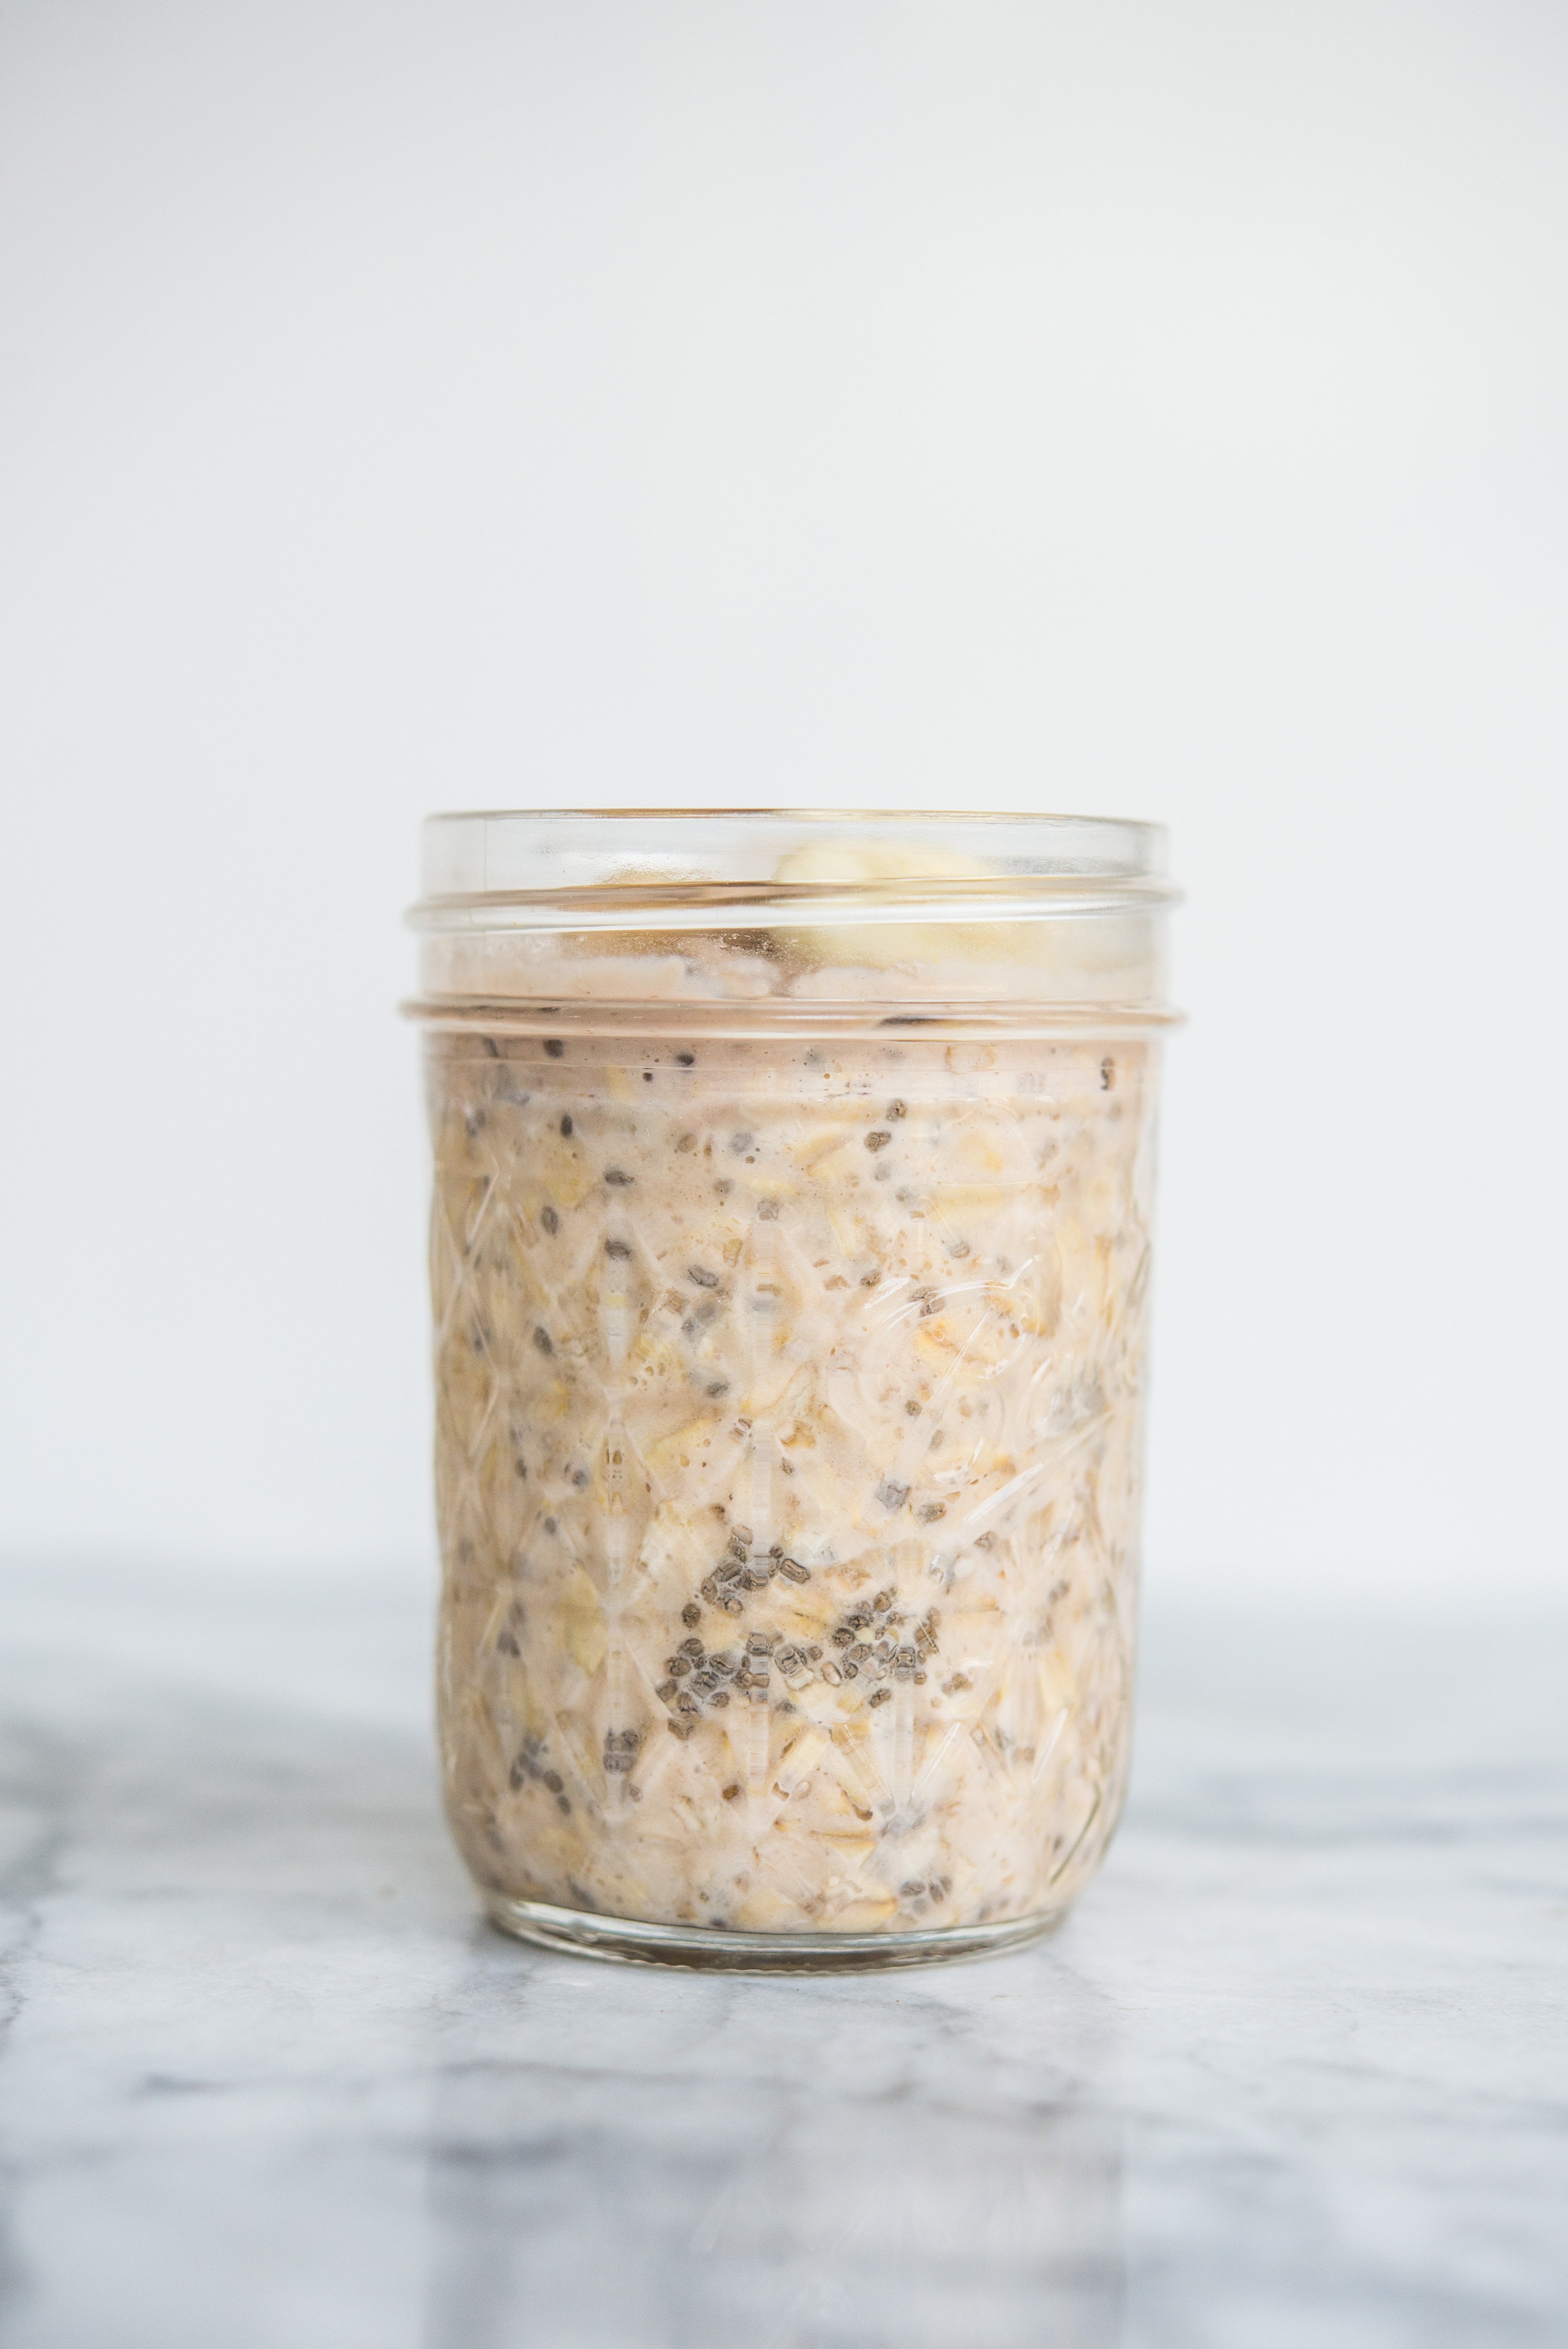 https://fedandfit.com/wp-content/uploads/2019/08/Overnight-Oats-4-Ways-Guide-Fed-and-Fit-9.jpg